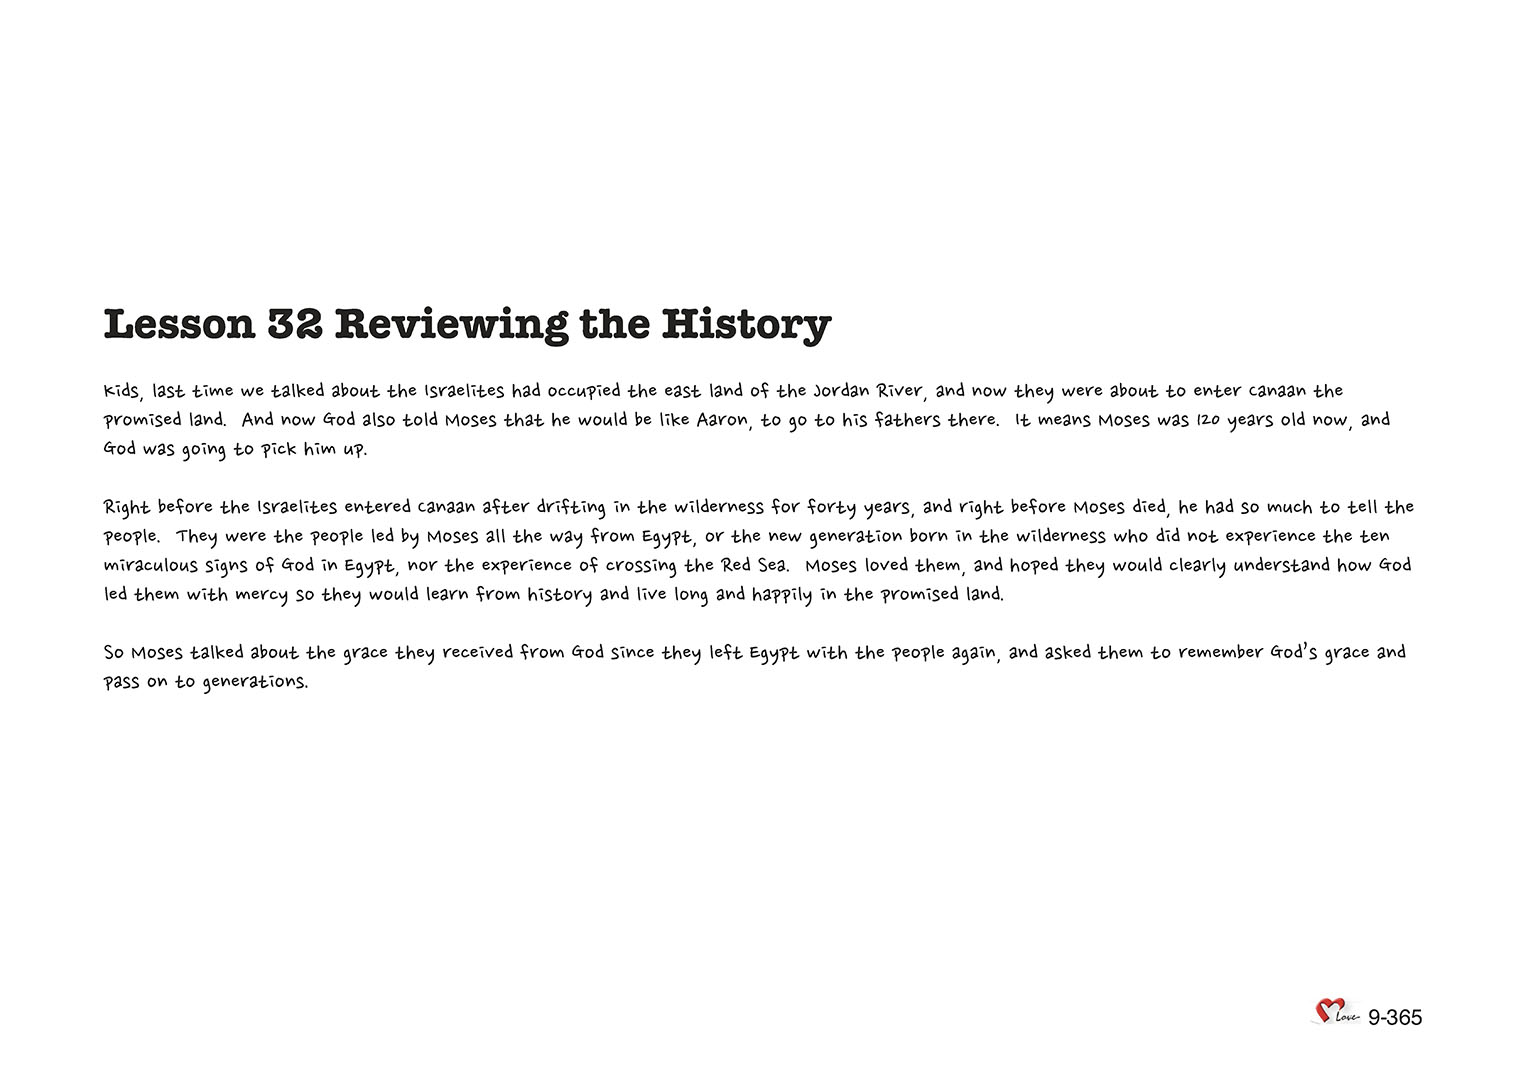 Chapter 9 - Lesson 32 - Reviewing the History